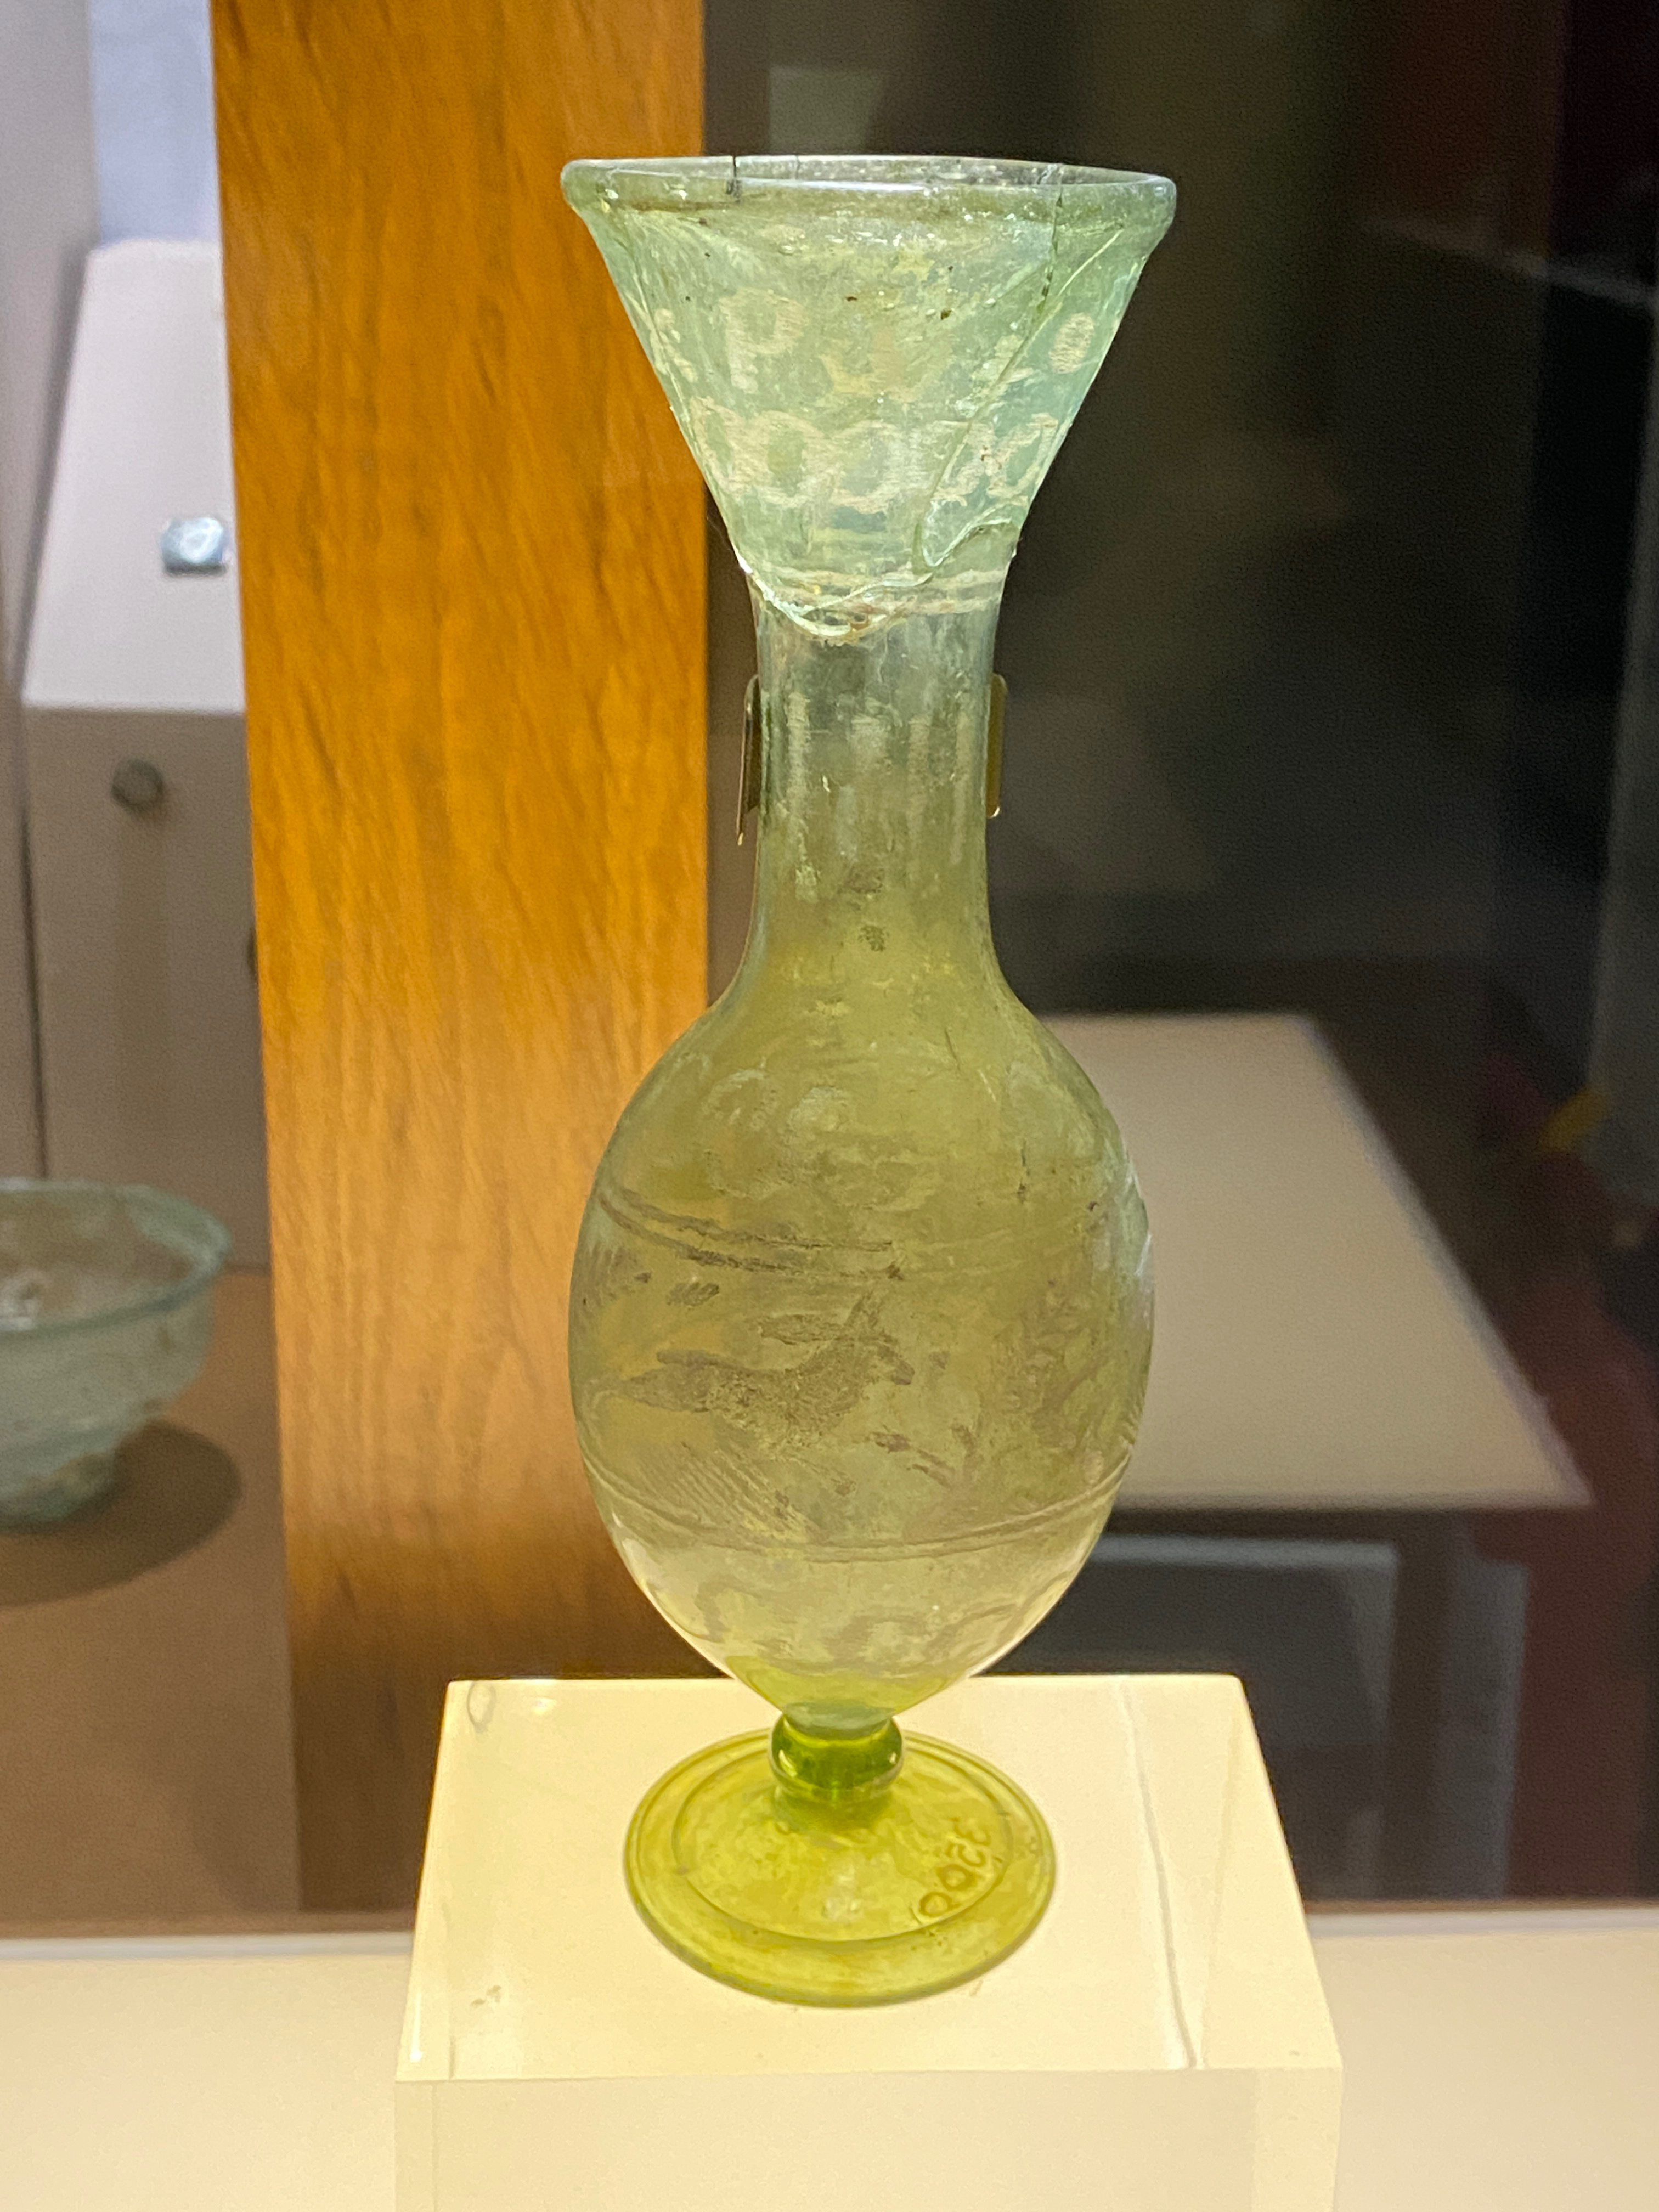 The amazing Highdown Goblet, made from Egyptian glass around 400AD